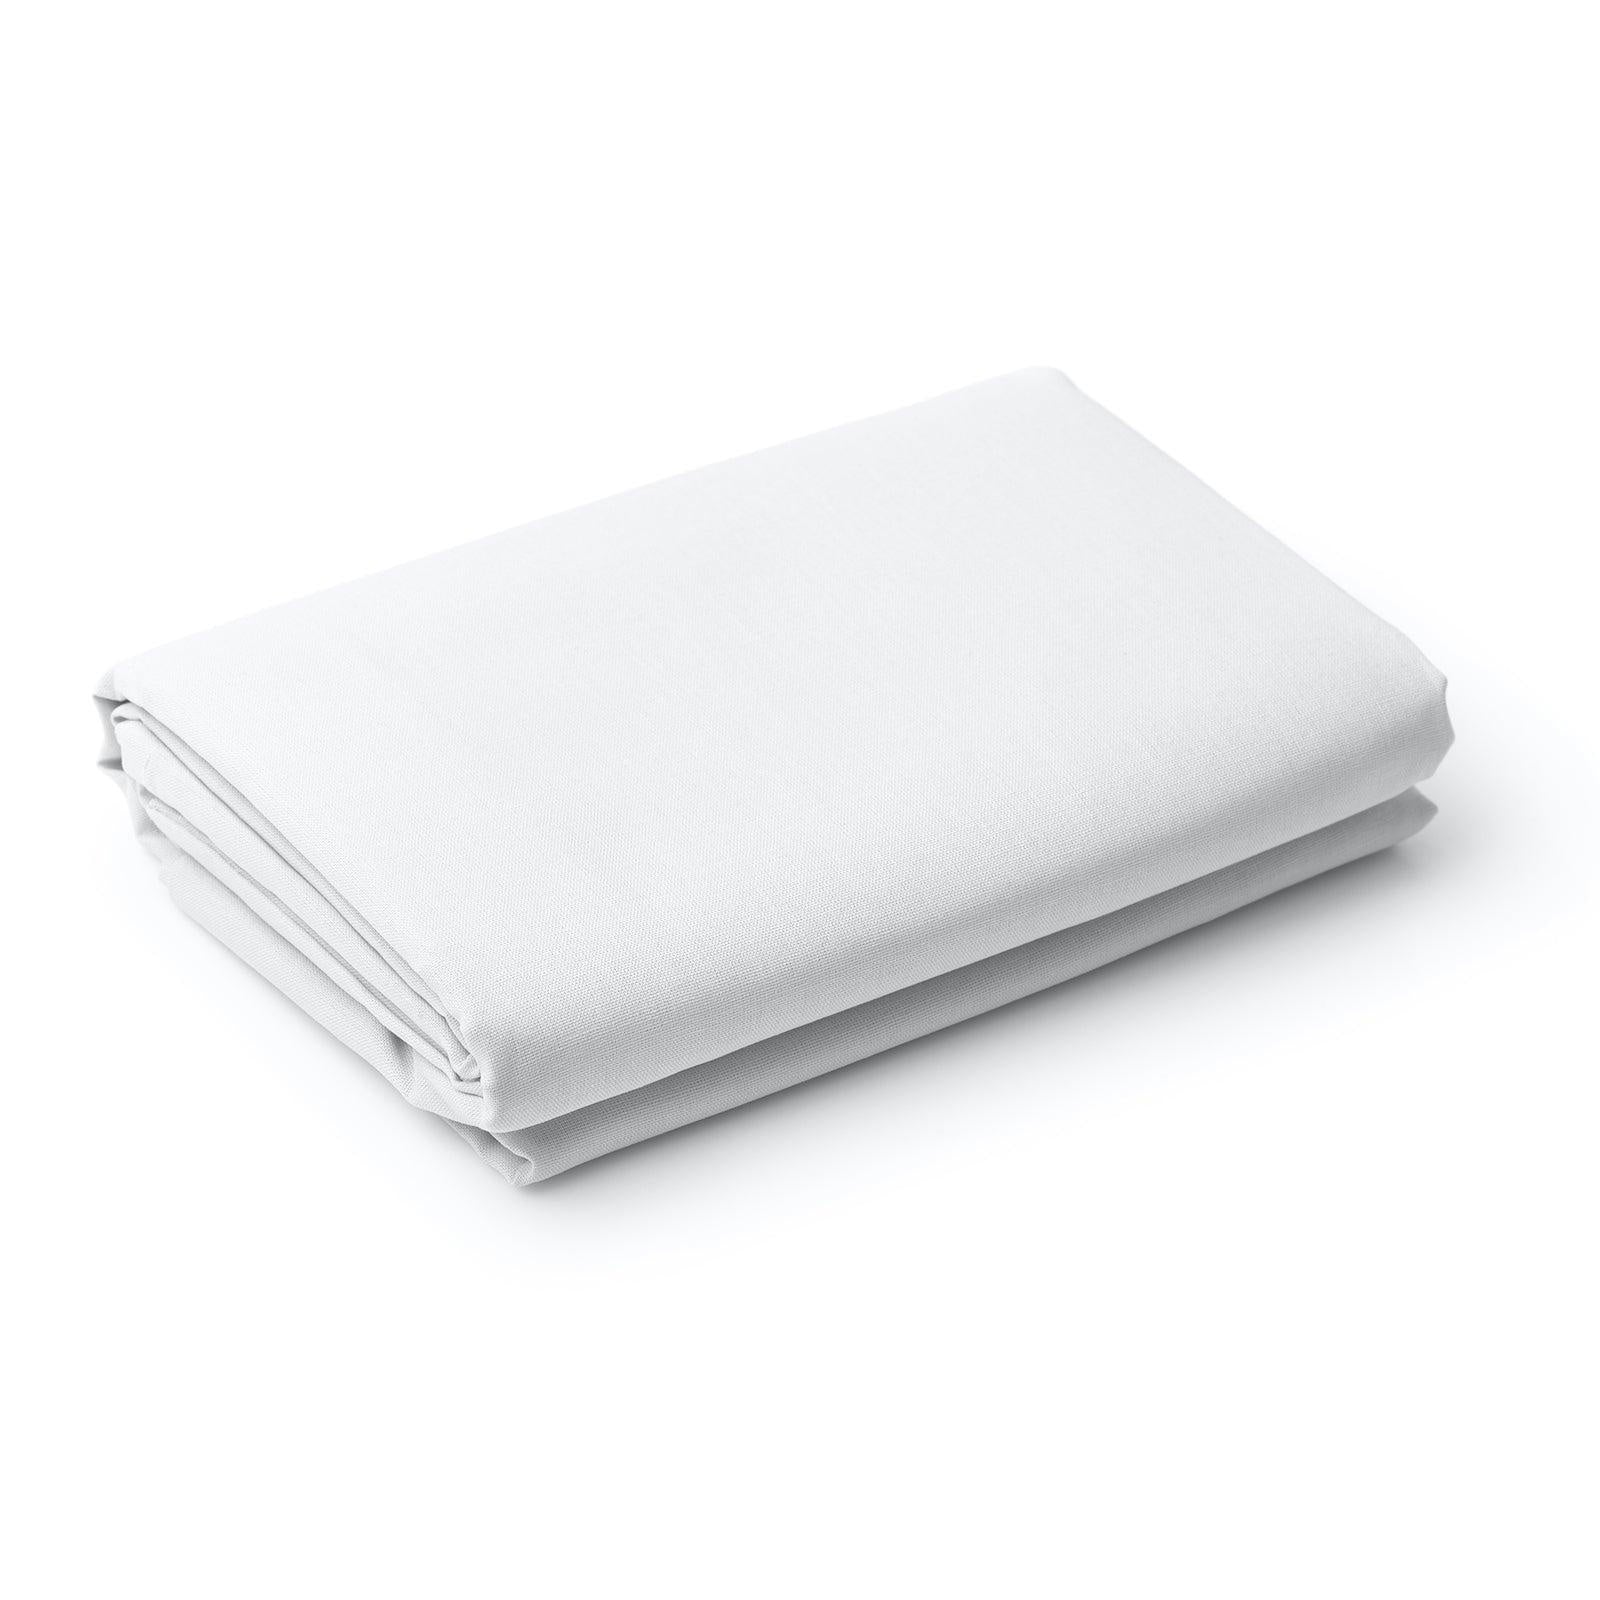 Royal Comfort 1200 Thread Count Fitted Sheet Cotton Blend Ultra Soft Bedding White King Deals499